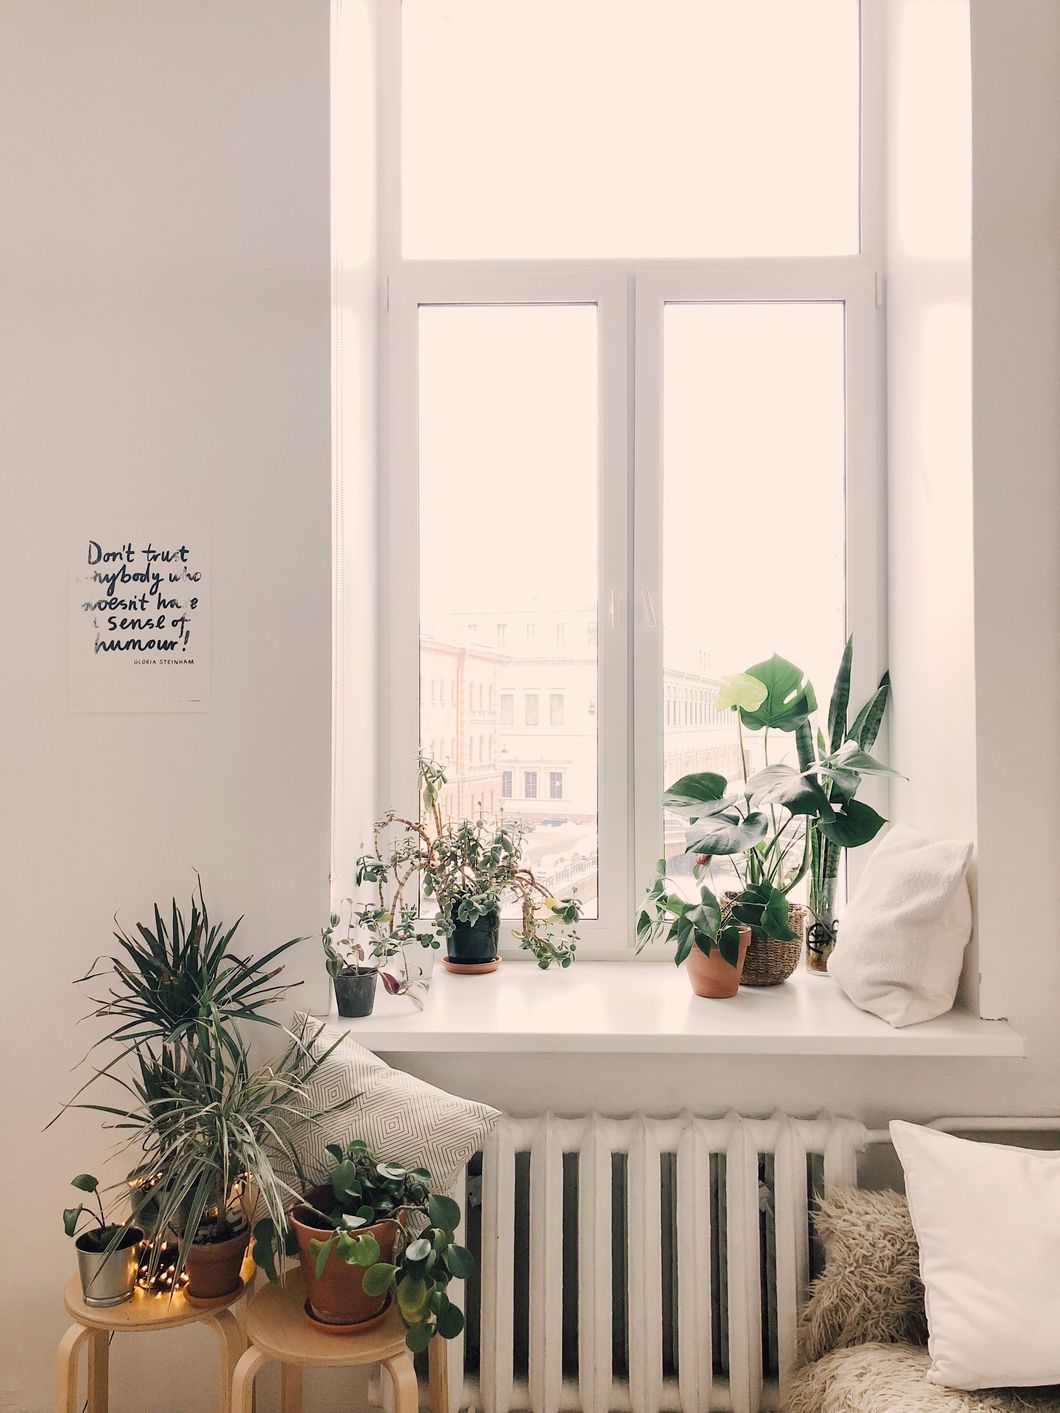 https://www.pexels.com/photo/photo-of-green-leaf-potted-plants-on-window-and-stand-930004/